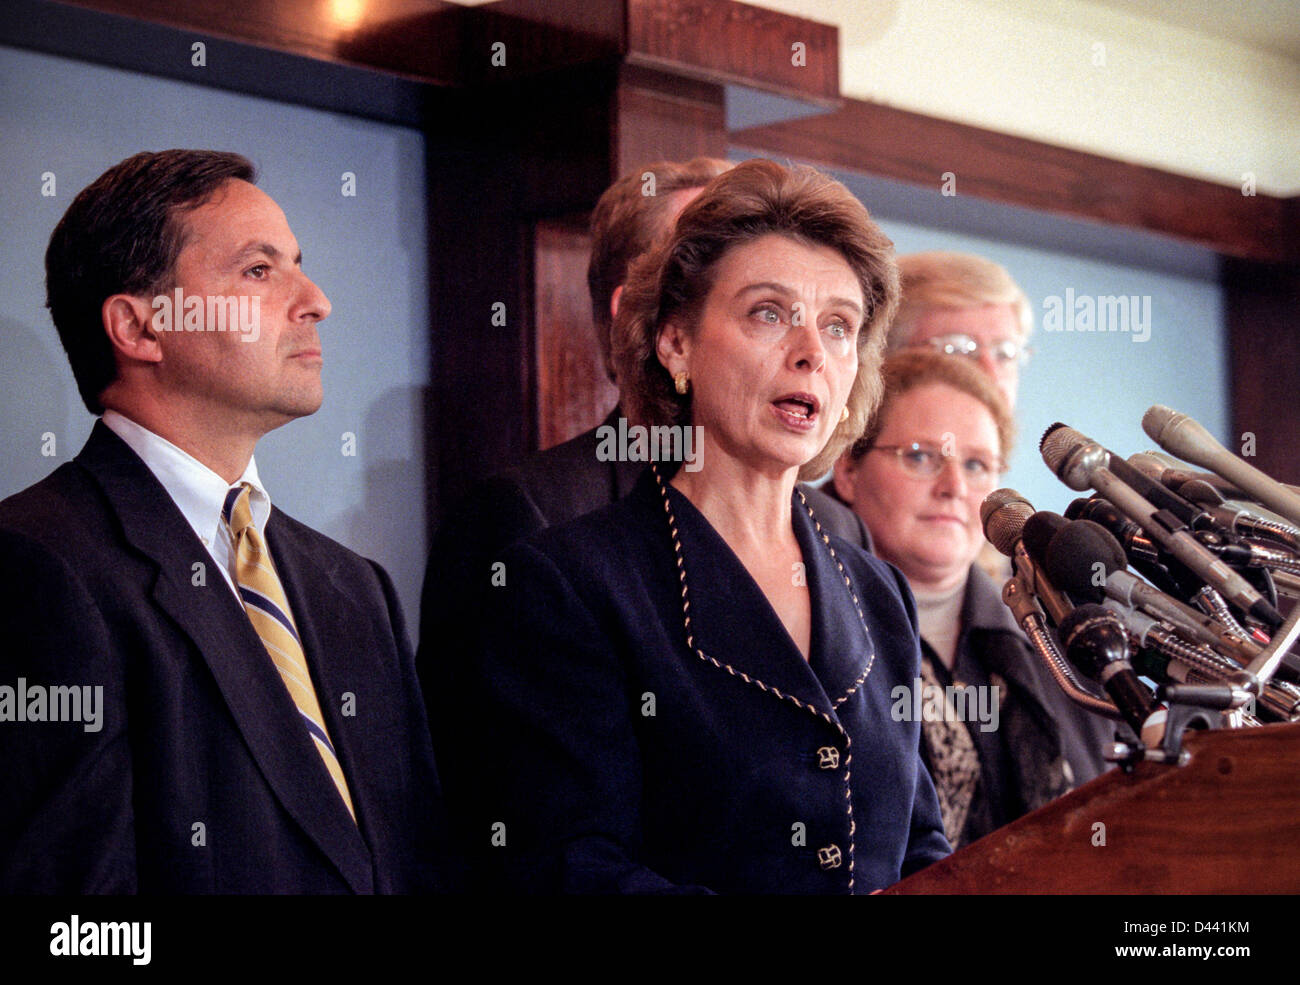 Washington Attorney General Christine Gregoire with other state attorneys general discusses a $206 billion settlement with tobacco companies November 16, 1998 in Washington, DC. Stock Photo